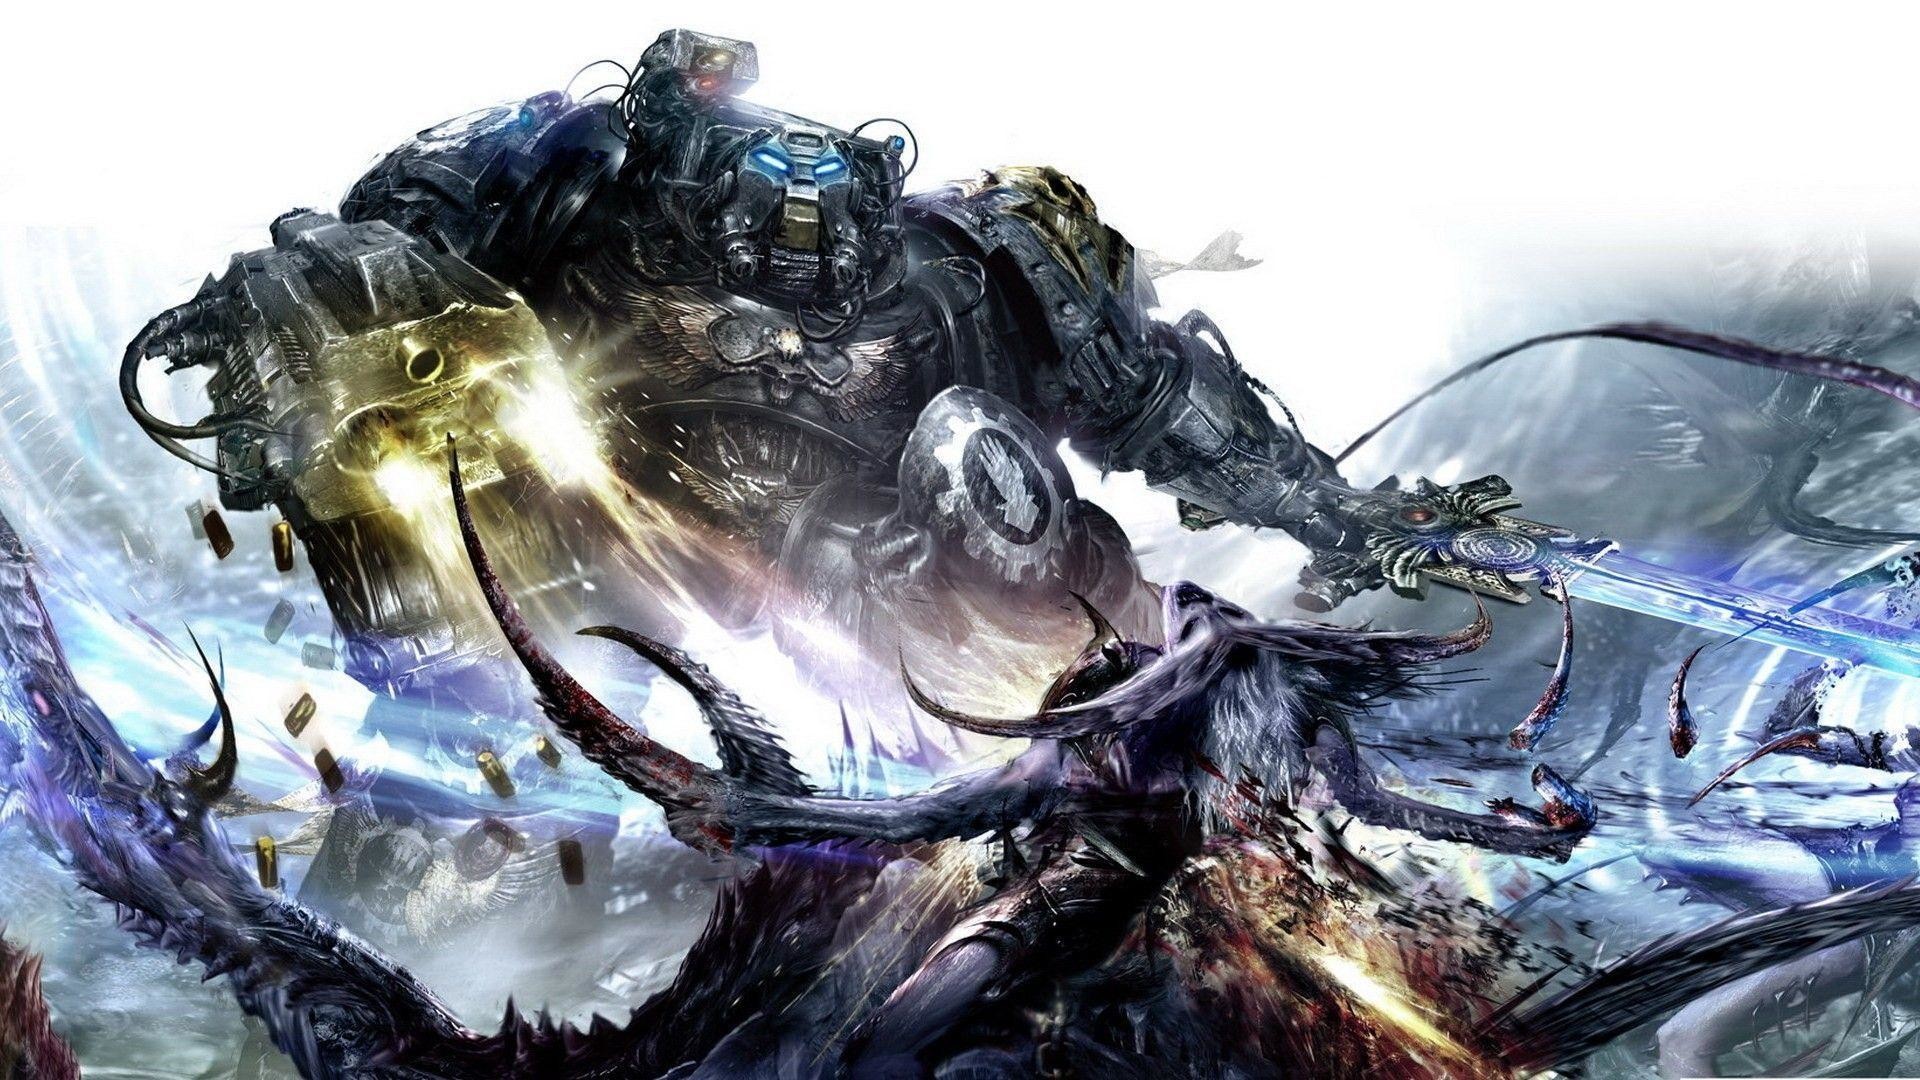 1920x1080 Warhammer 40k Wallpapers | HD Wallpapers Early